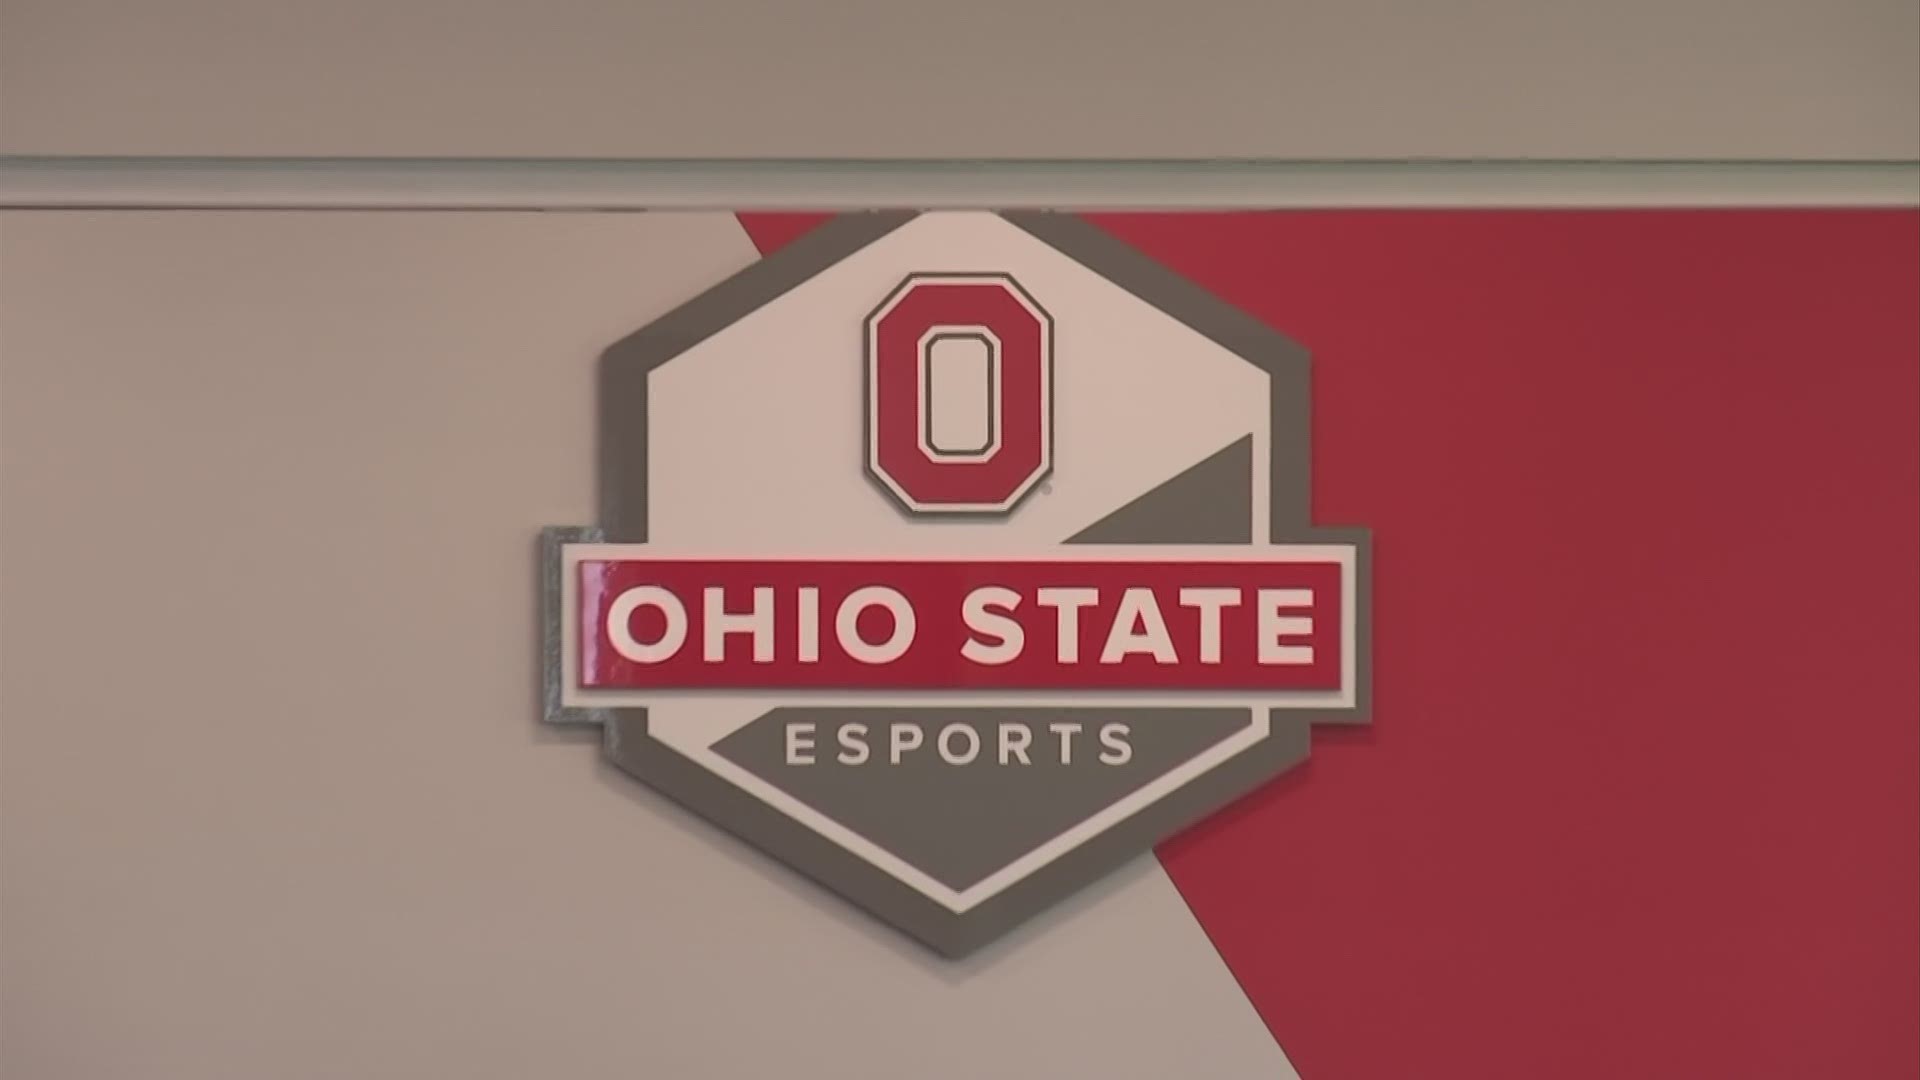 10Tv shows how the Ohio State E-Sports team is handling the pandemic.